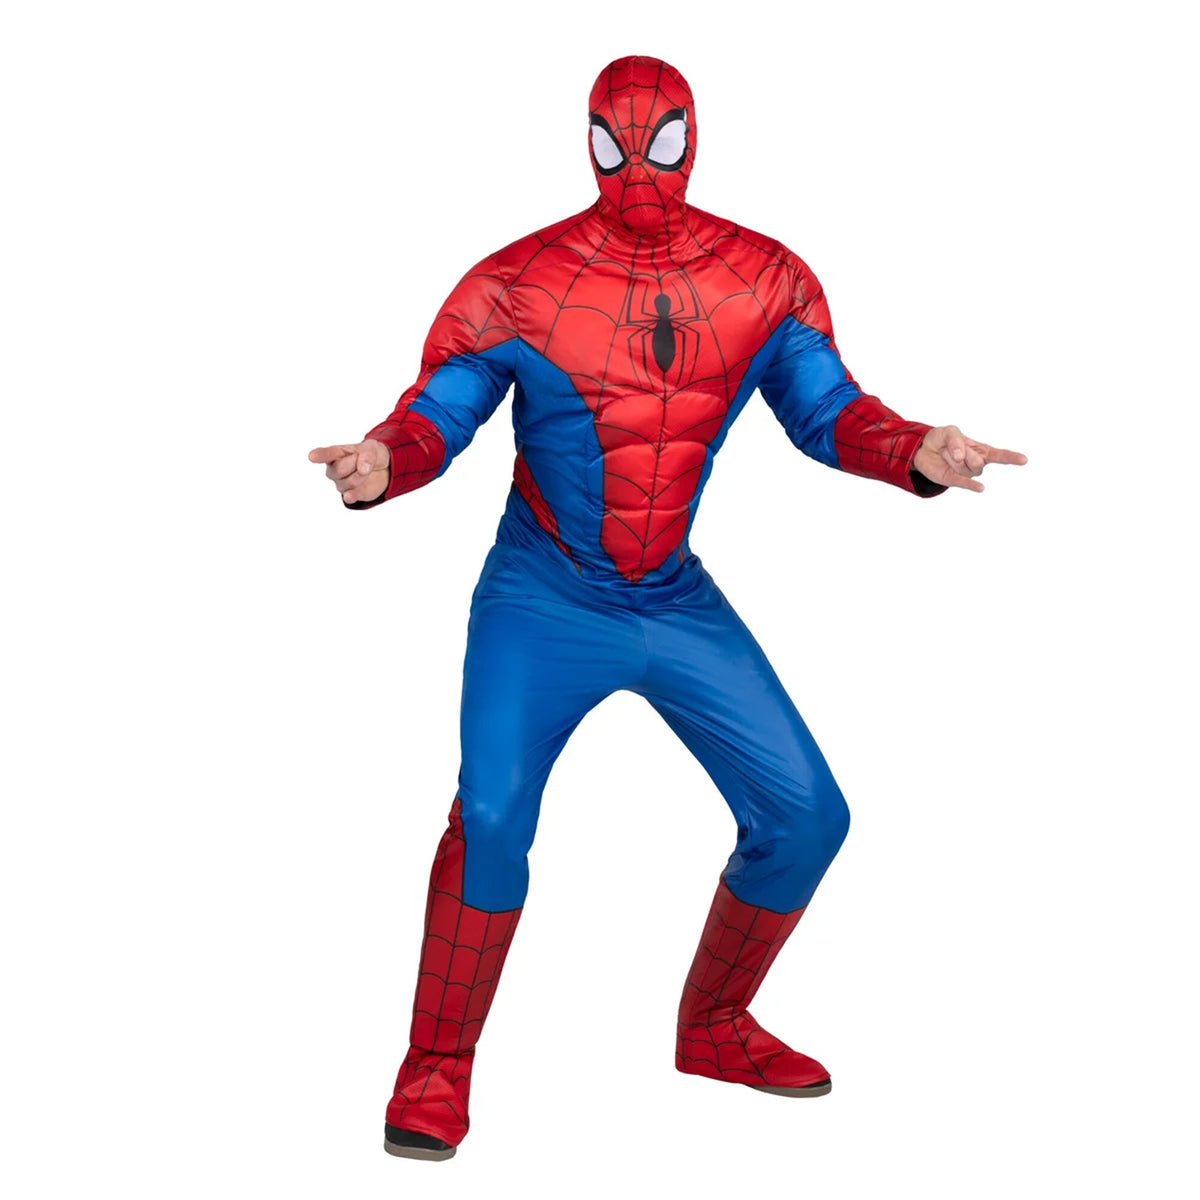 KROEGER Costumes Marvel Spider-Man Costume for Adults, Padded Jumpsuit